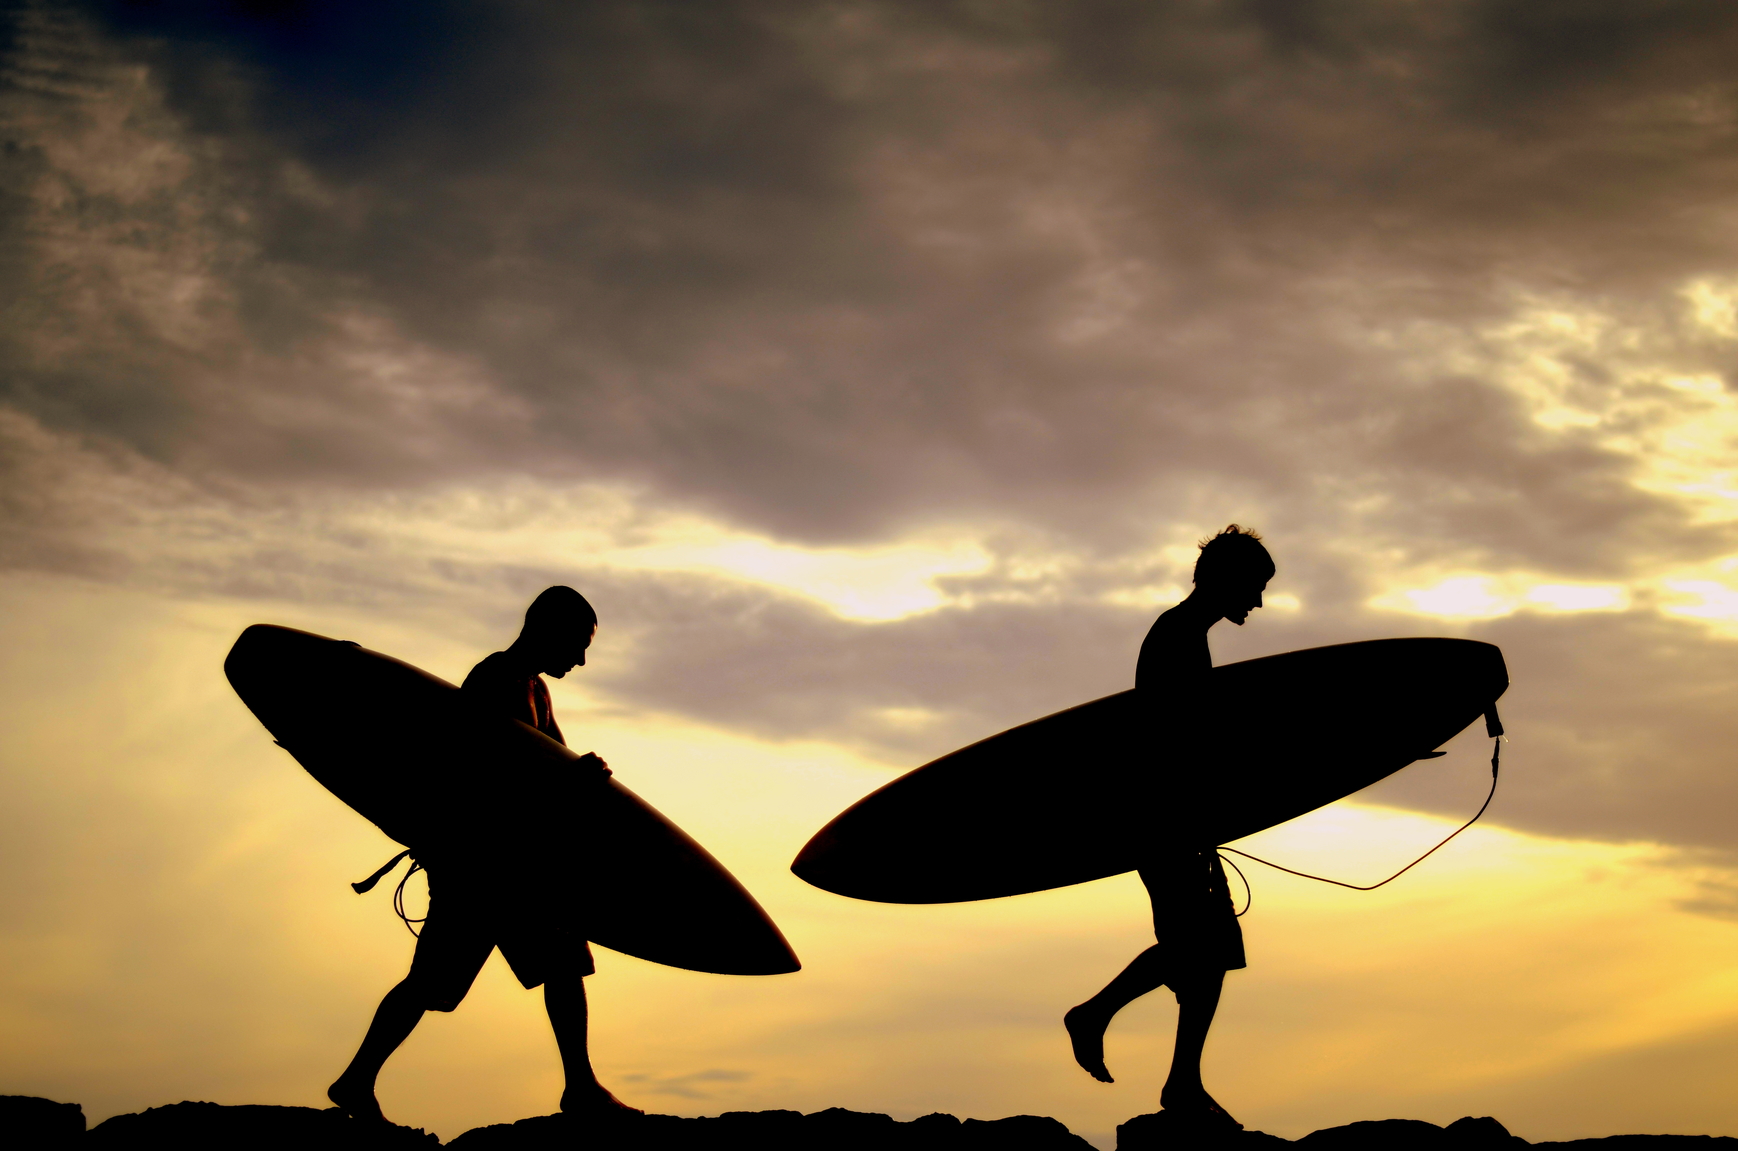 Vacation Silhouette Of Two Surfers Carrying Their Boards Home At Sunset